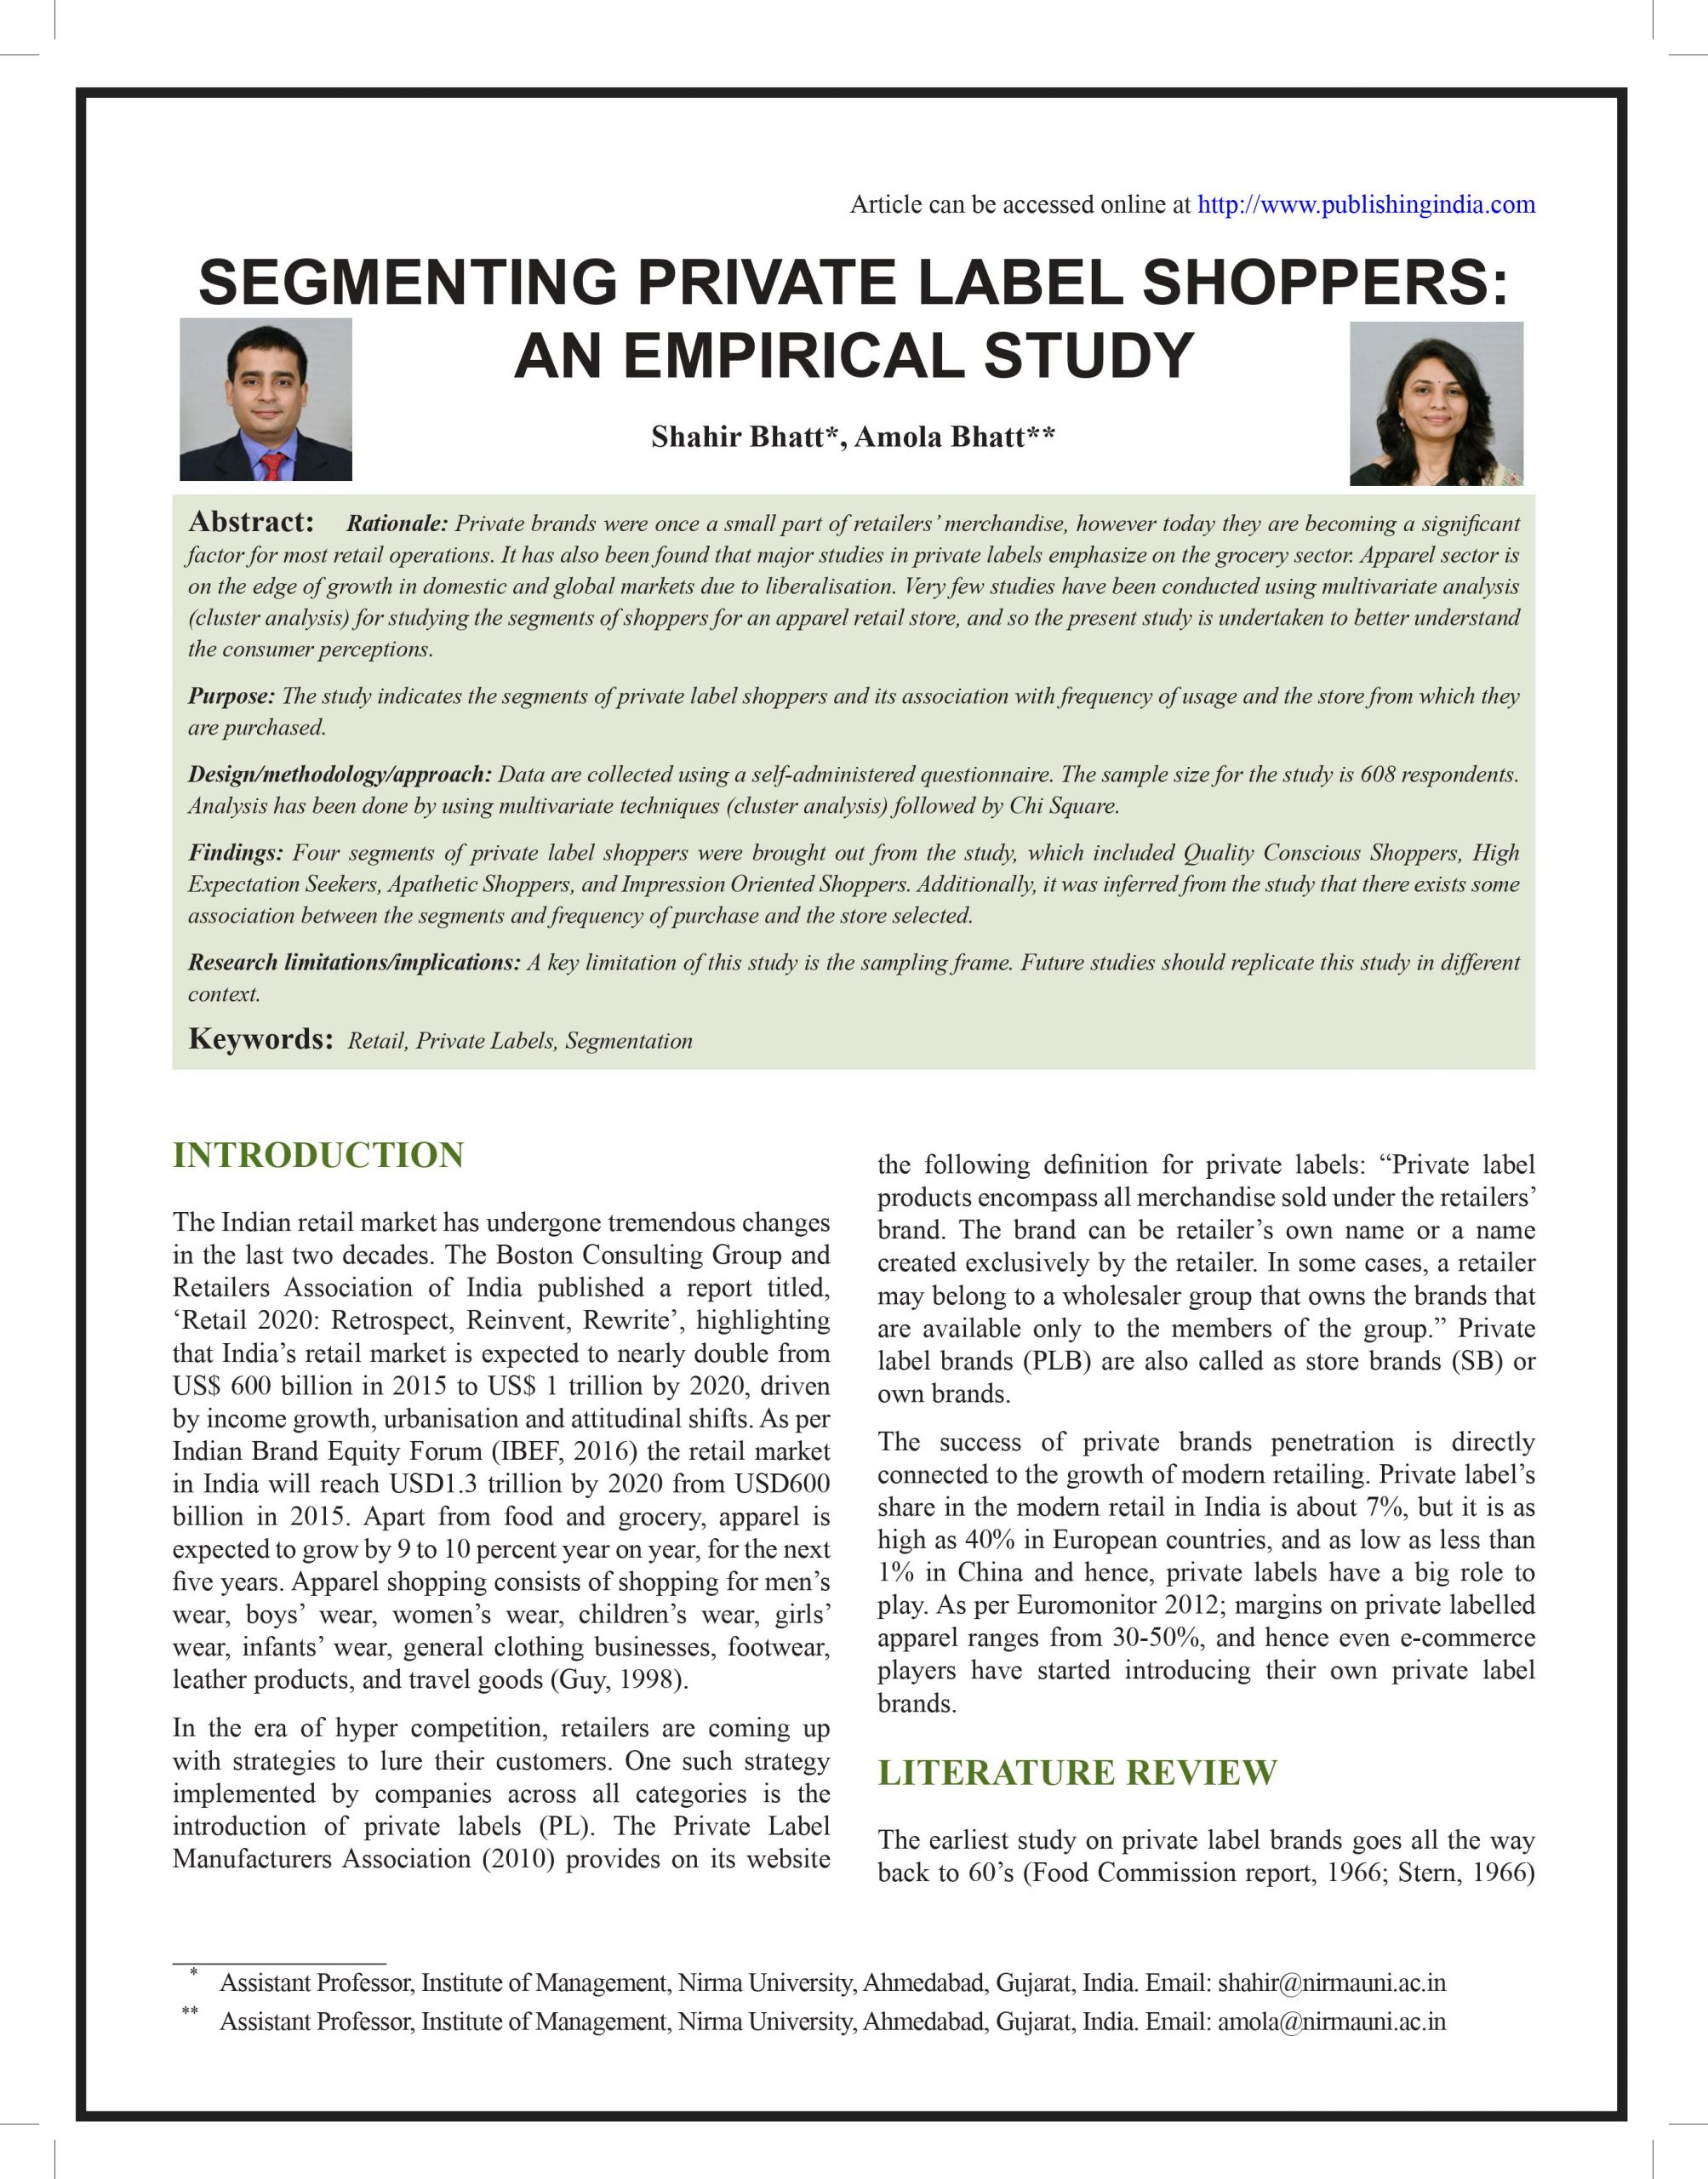 Segmenting Private label Shoppers: An Empirical Study